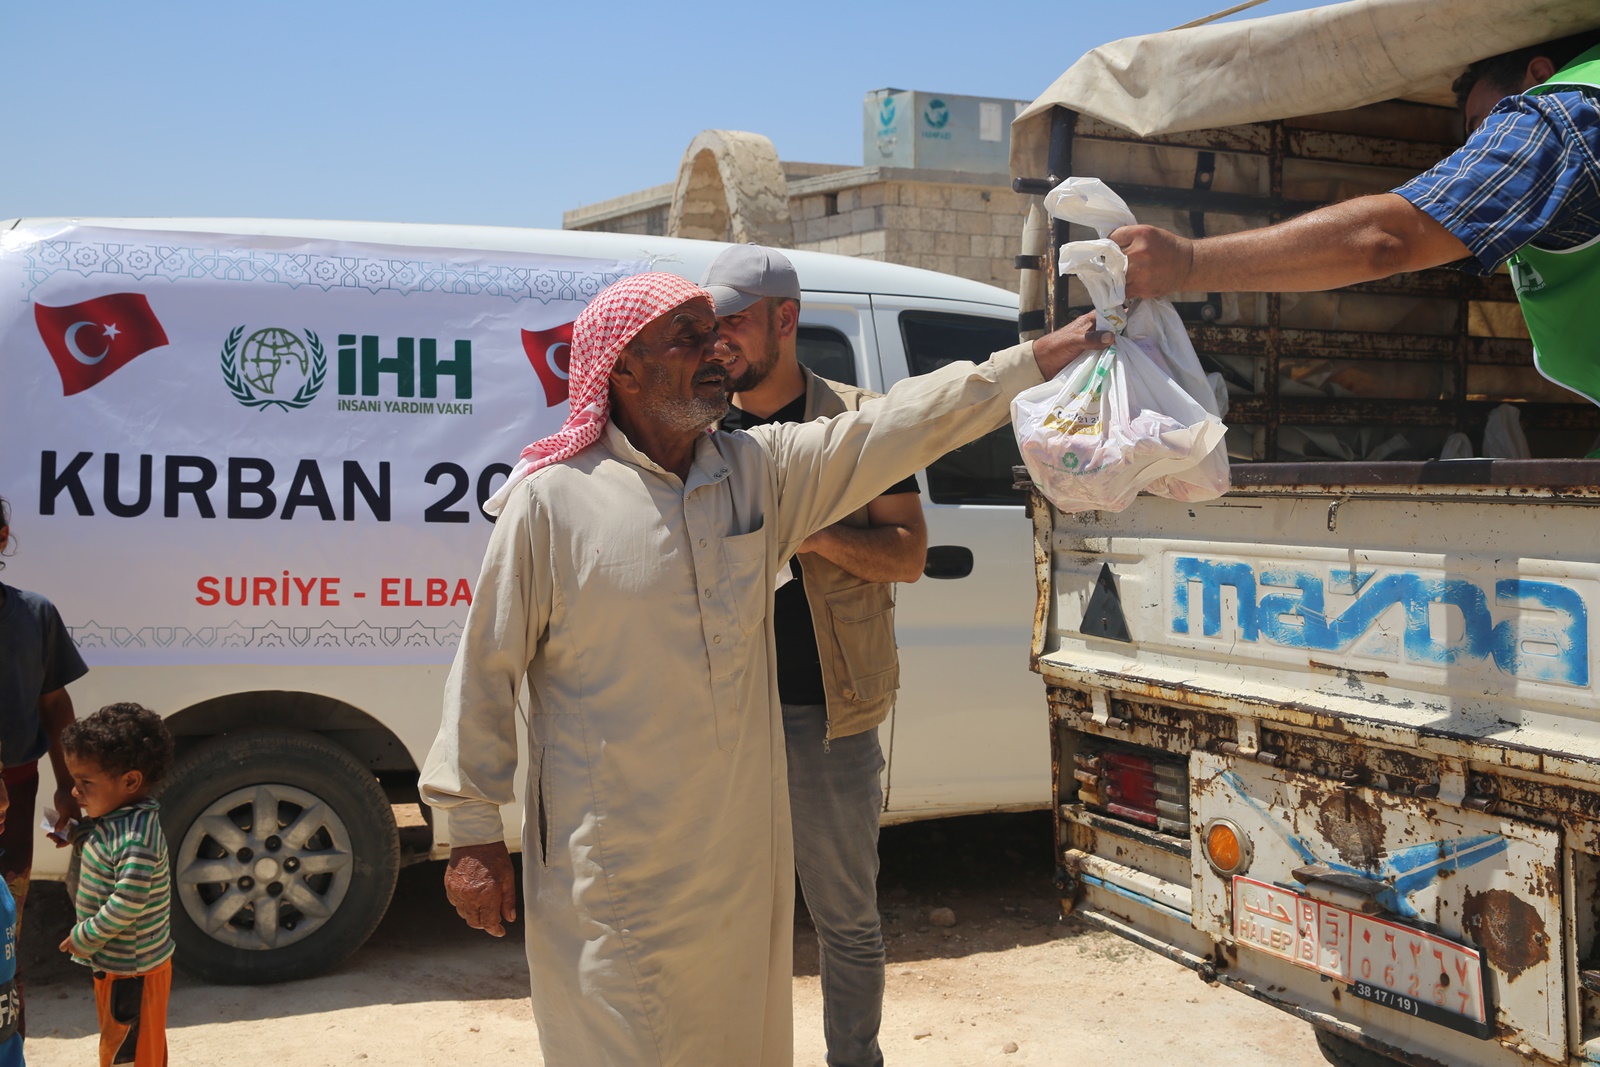 IHH delivered Qurbani meat to 98,000 people in Syria